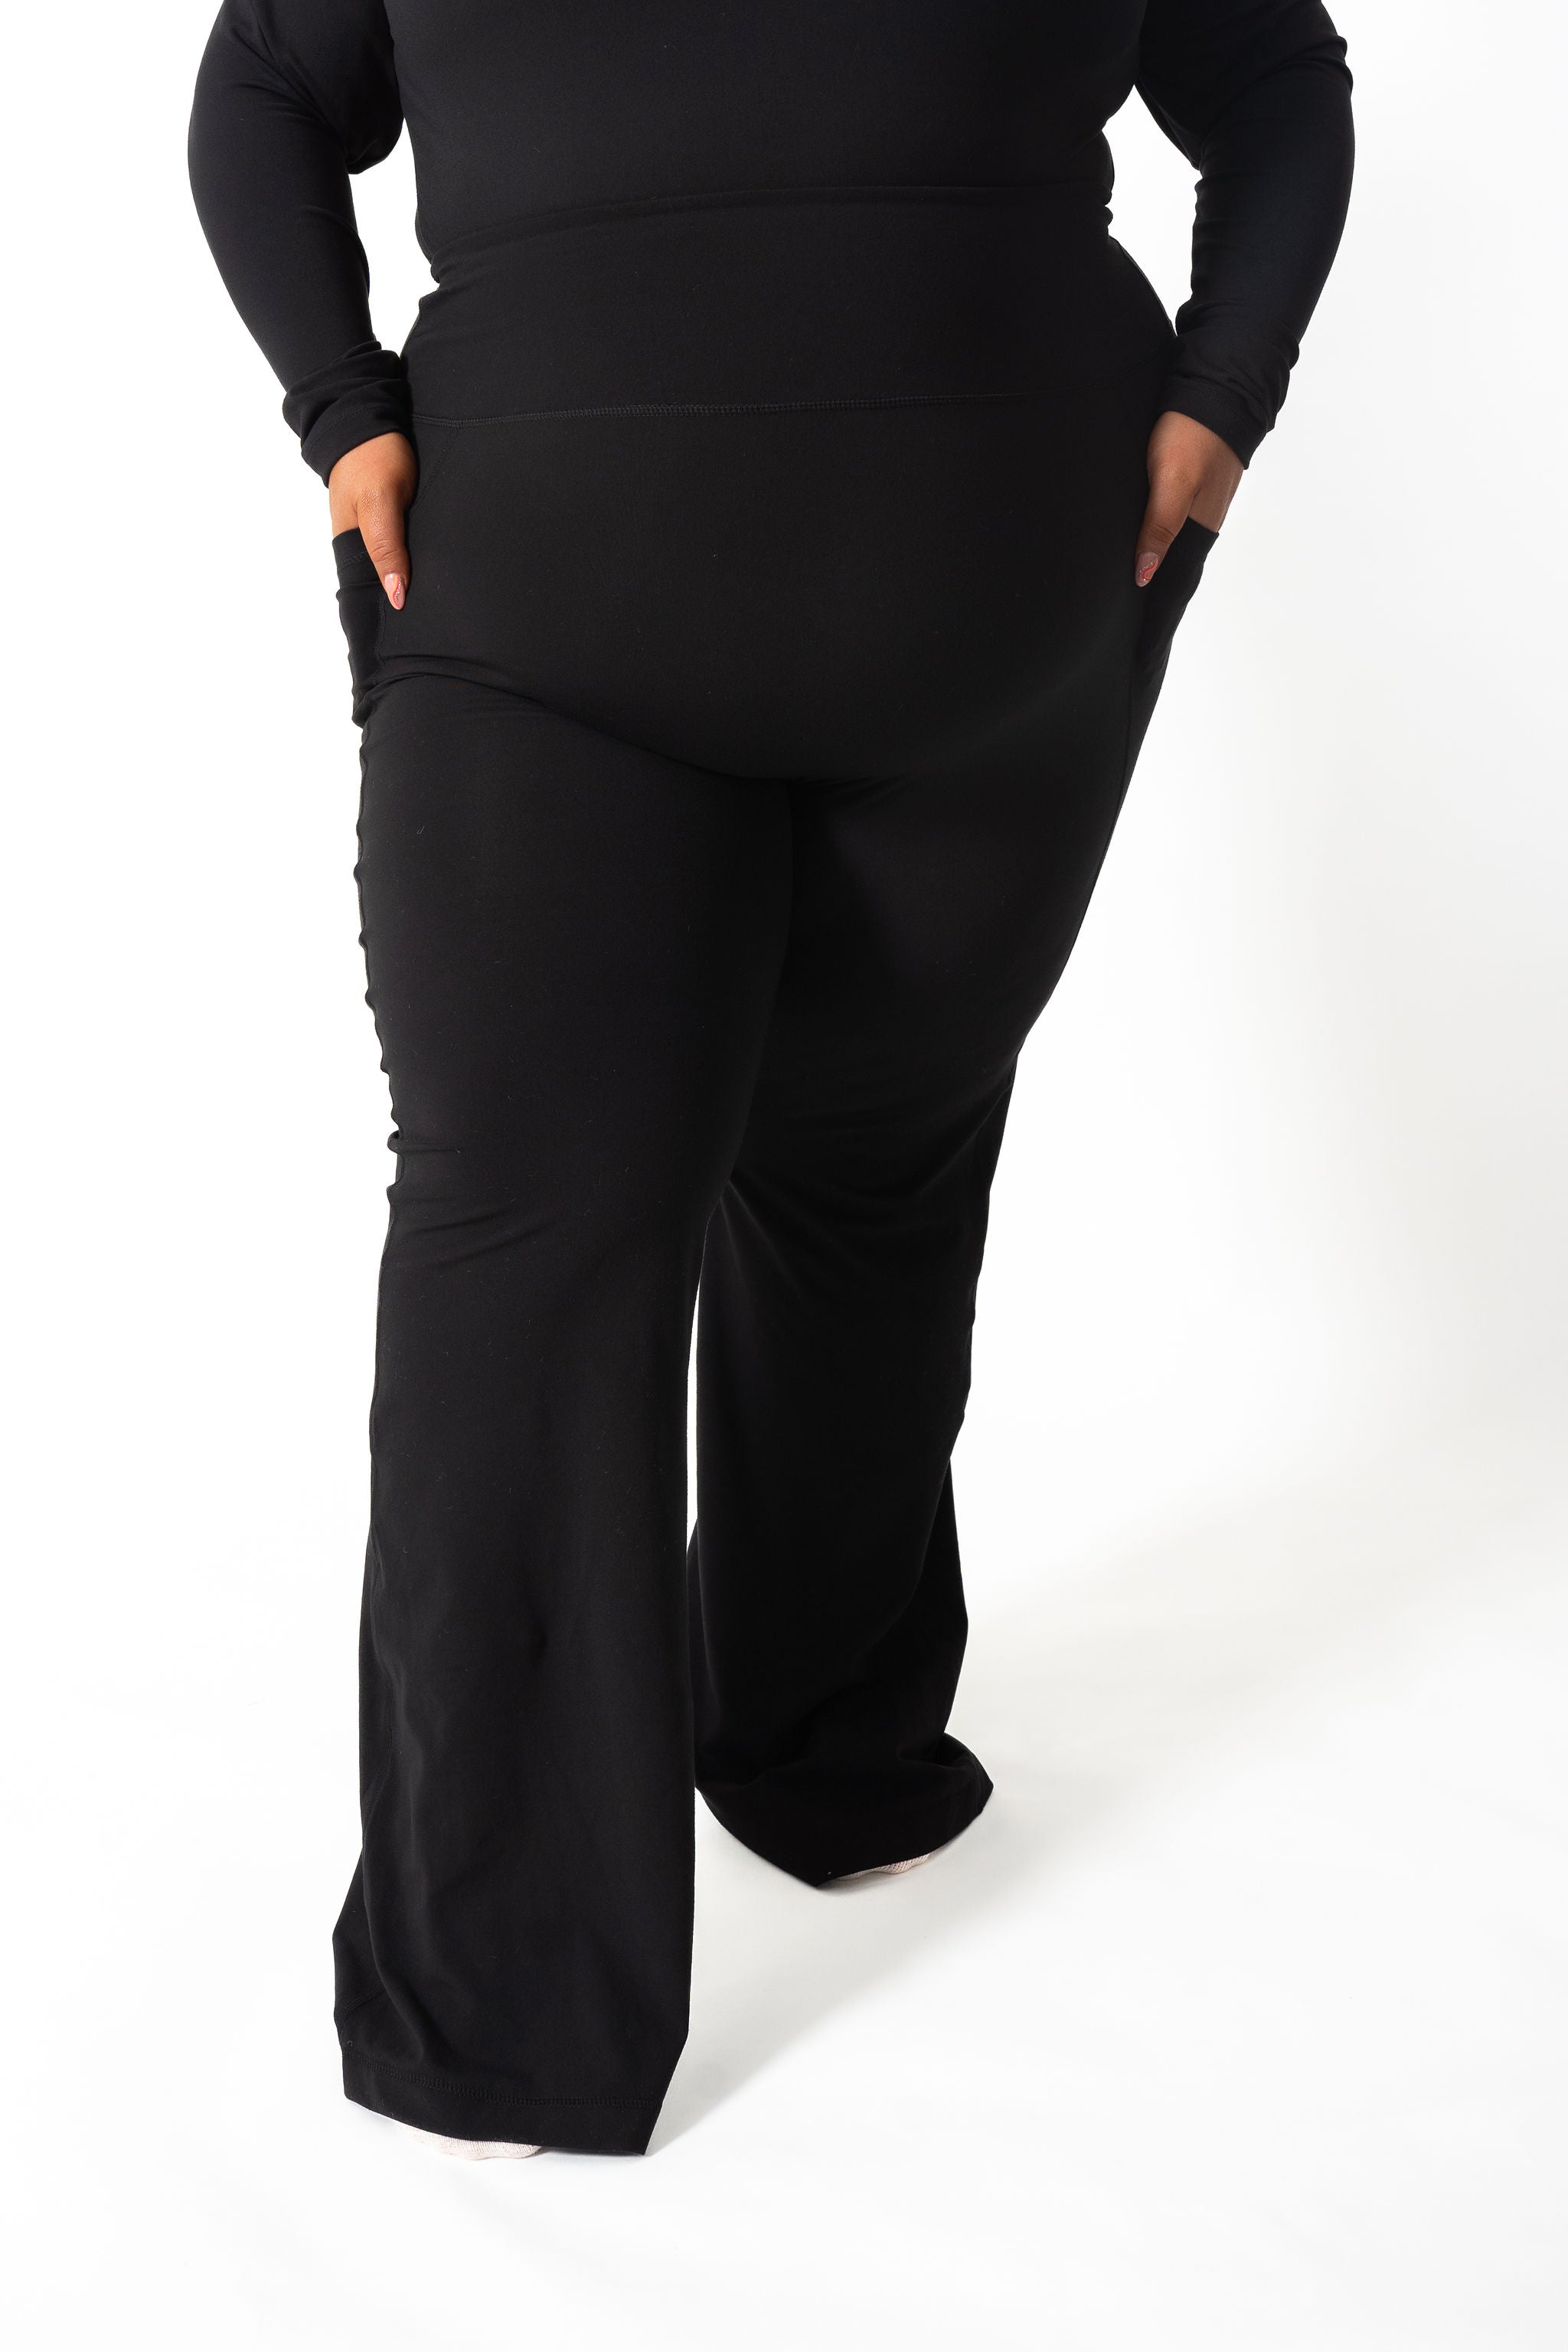 Basics Flared Yoga Pant With Pockets - J.LUXE.FIT